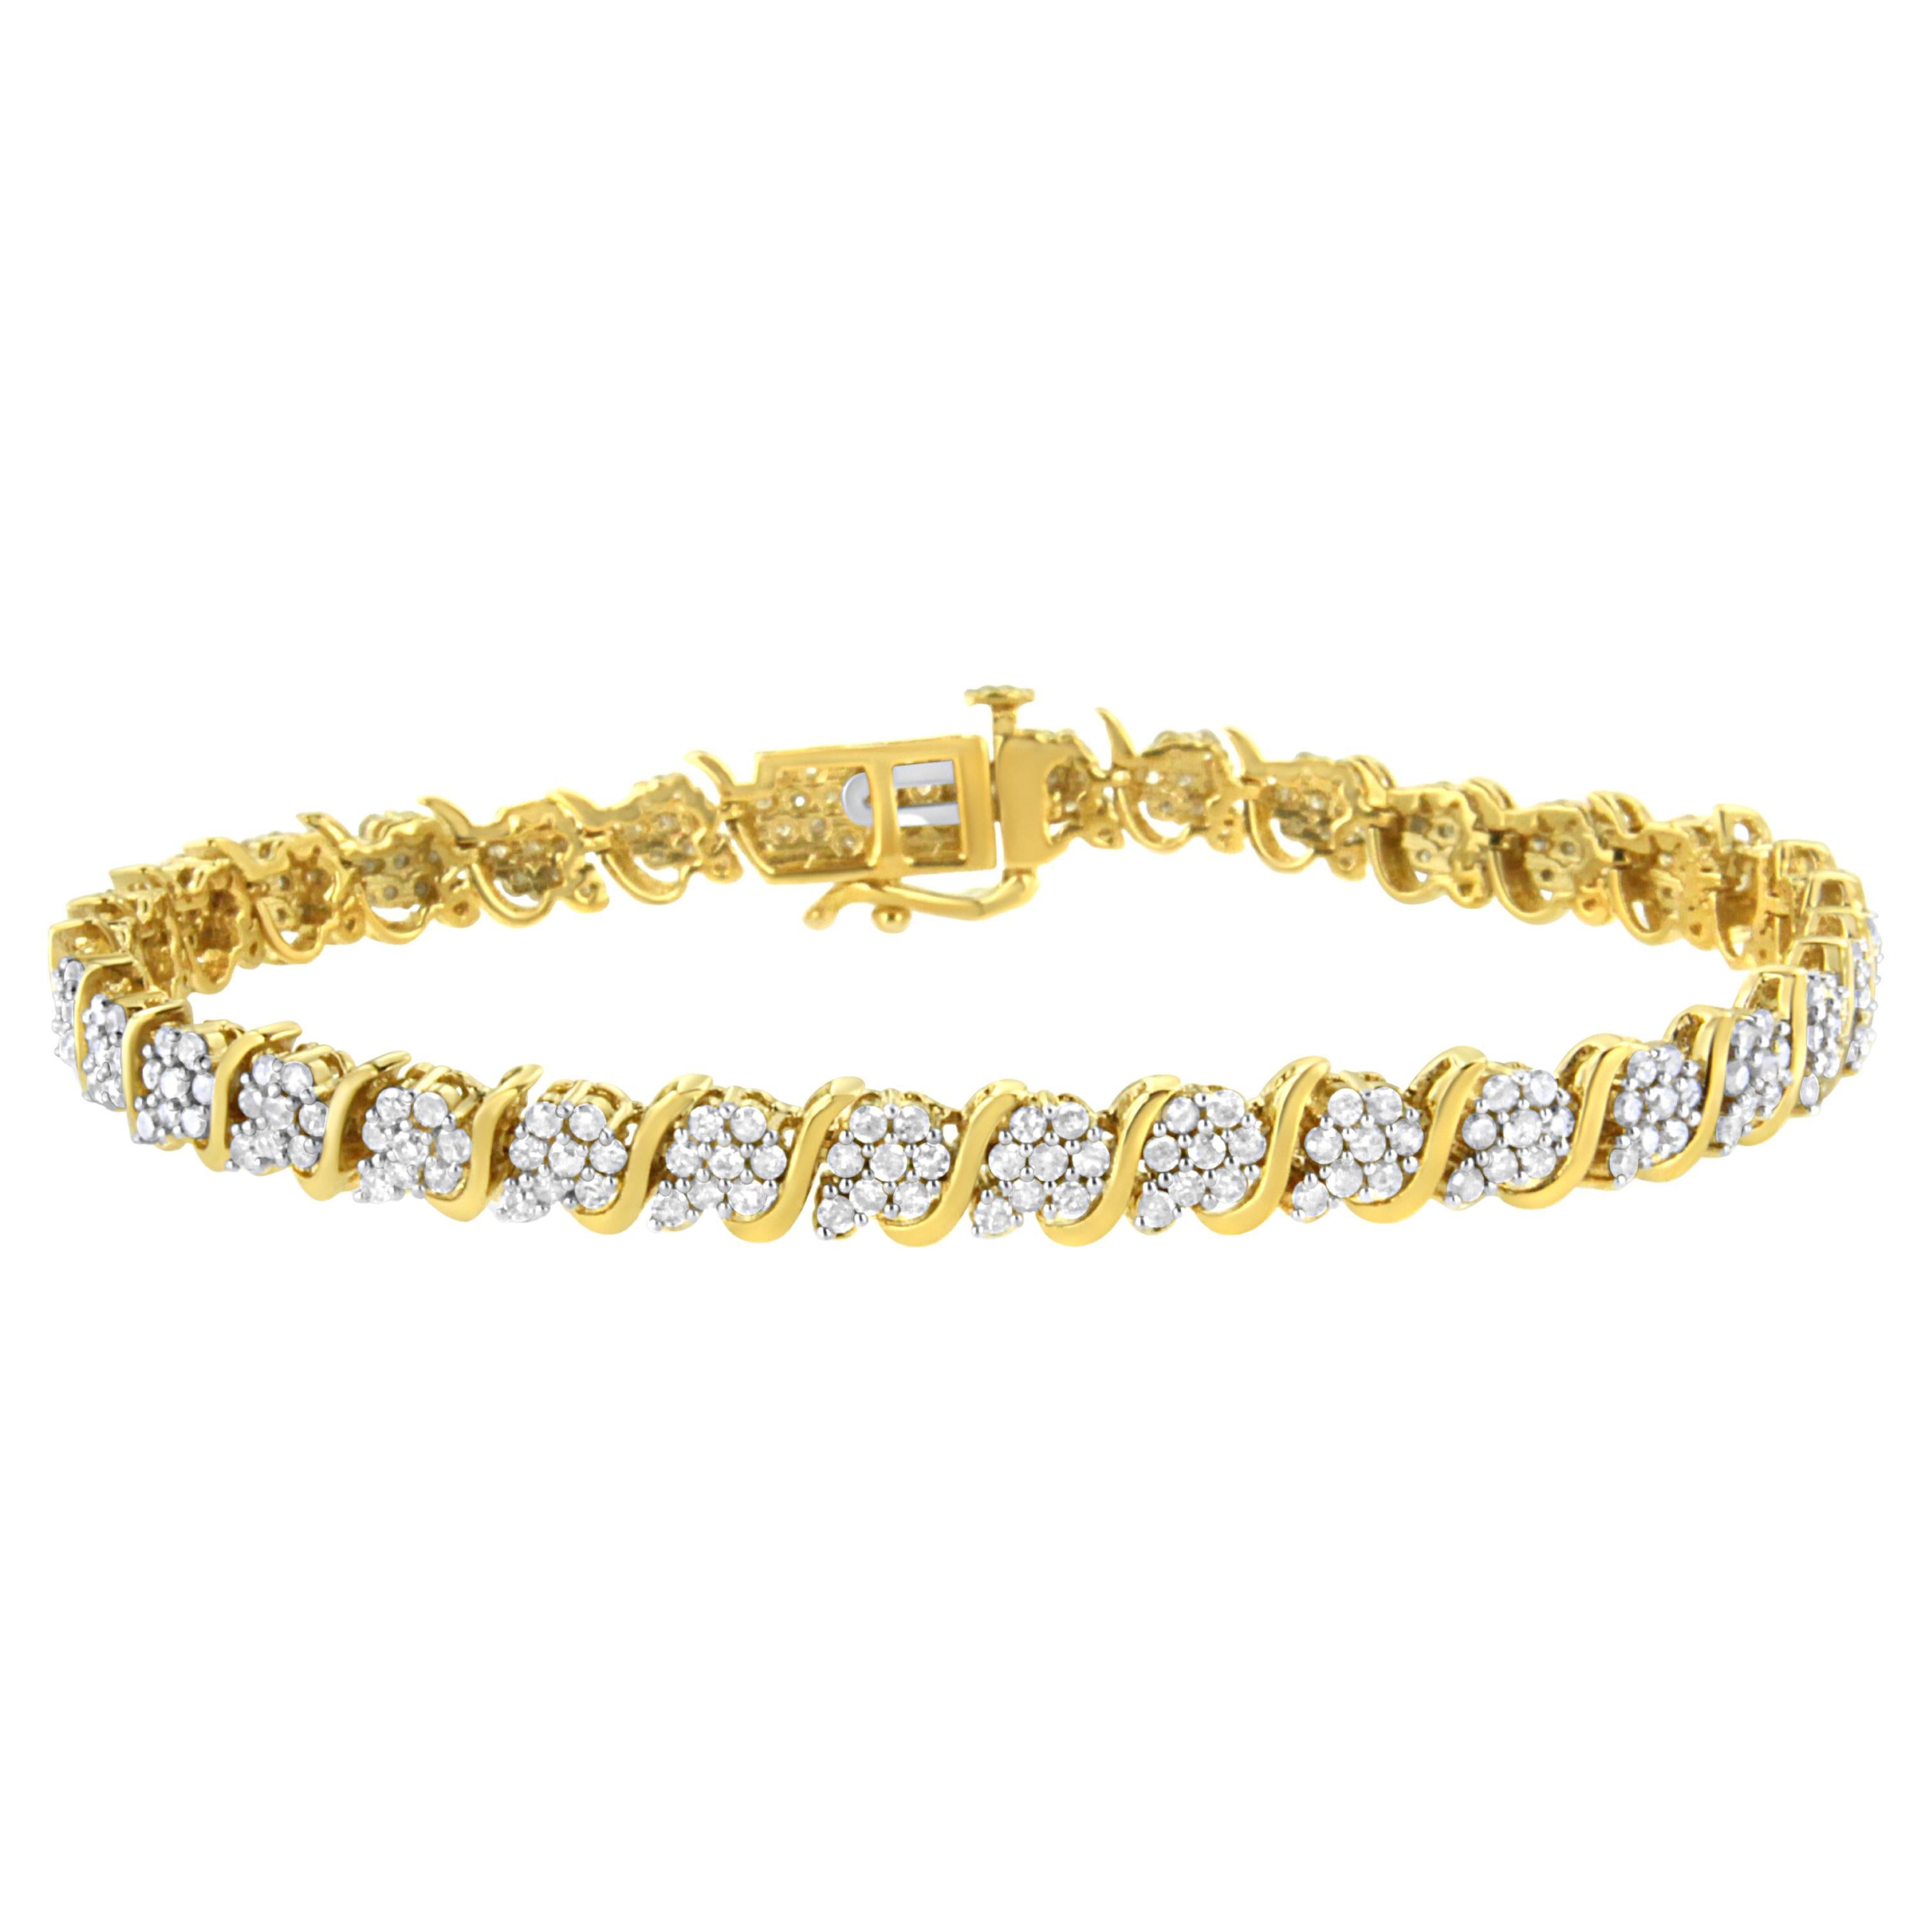 Yellow Gold Plated Sterling Silver 3.0 Carat Diamond "S" Link Tennis Bracelet